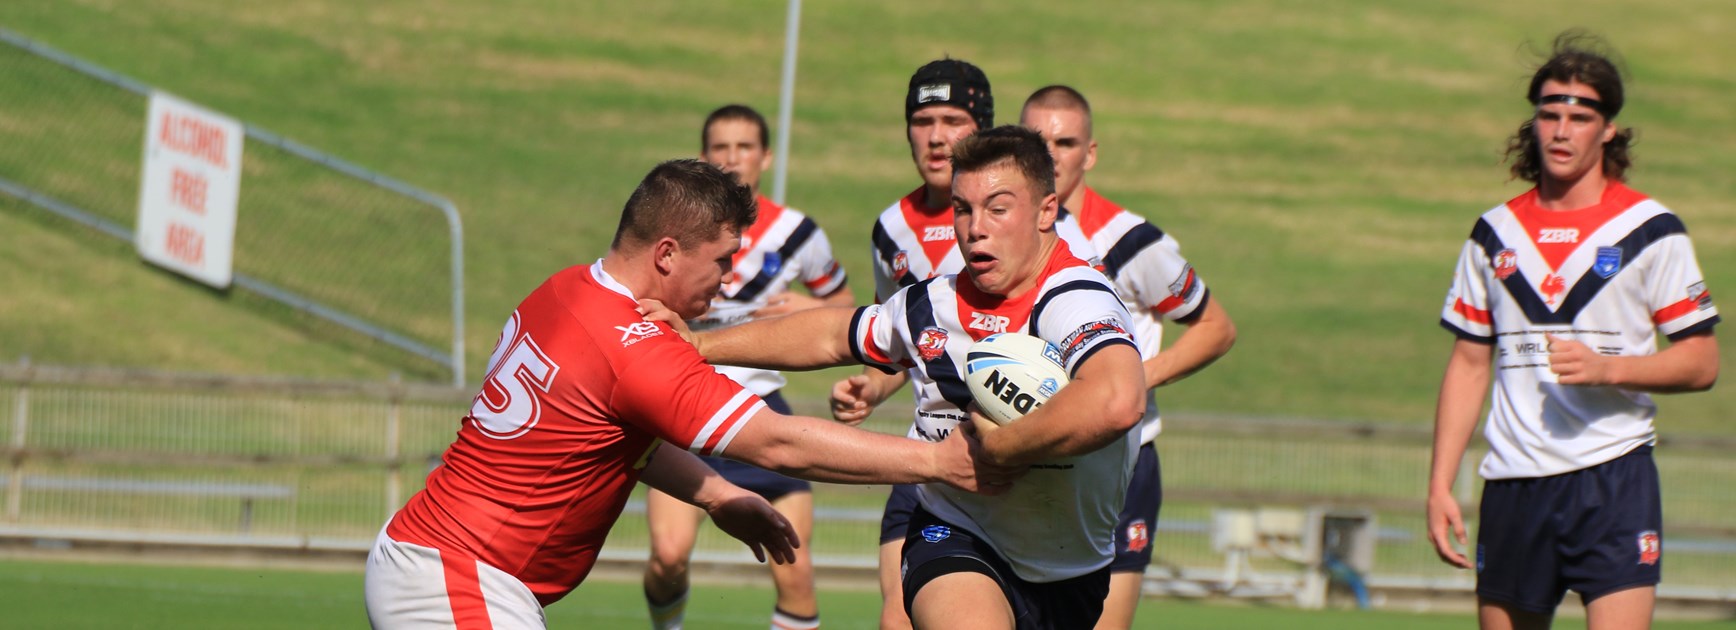 2019 SG Ball Finals Week 1 - Illawarra Steelers v Central Coast Roosters. Photo: Allan Barry 